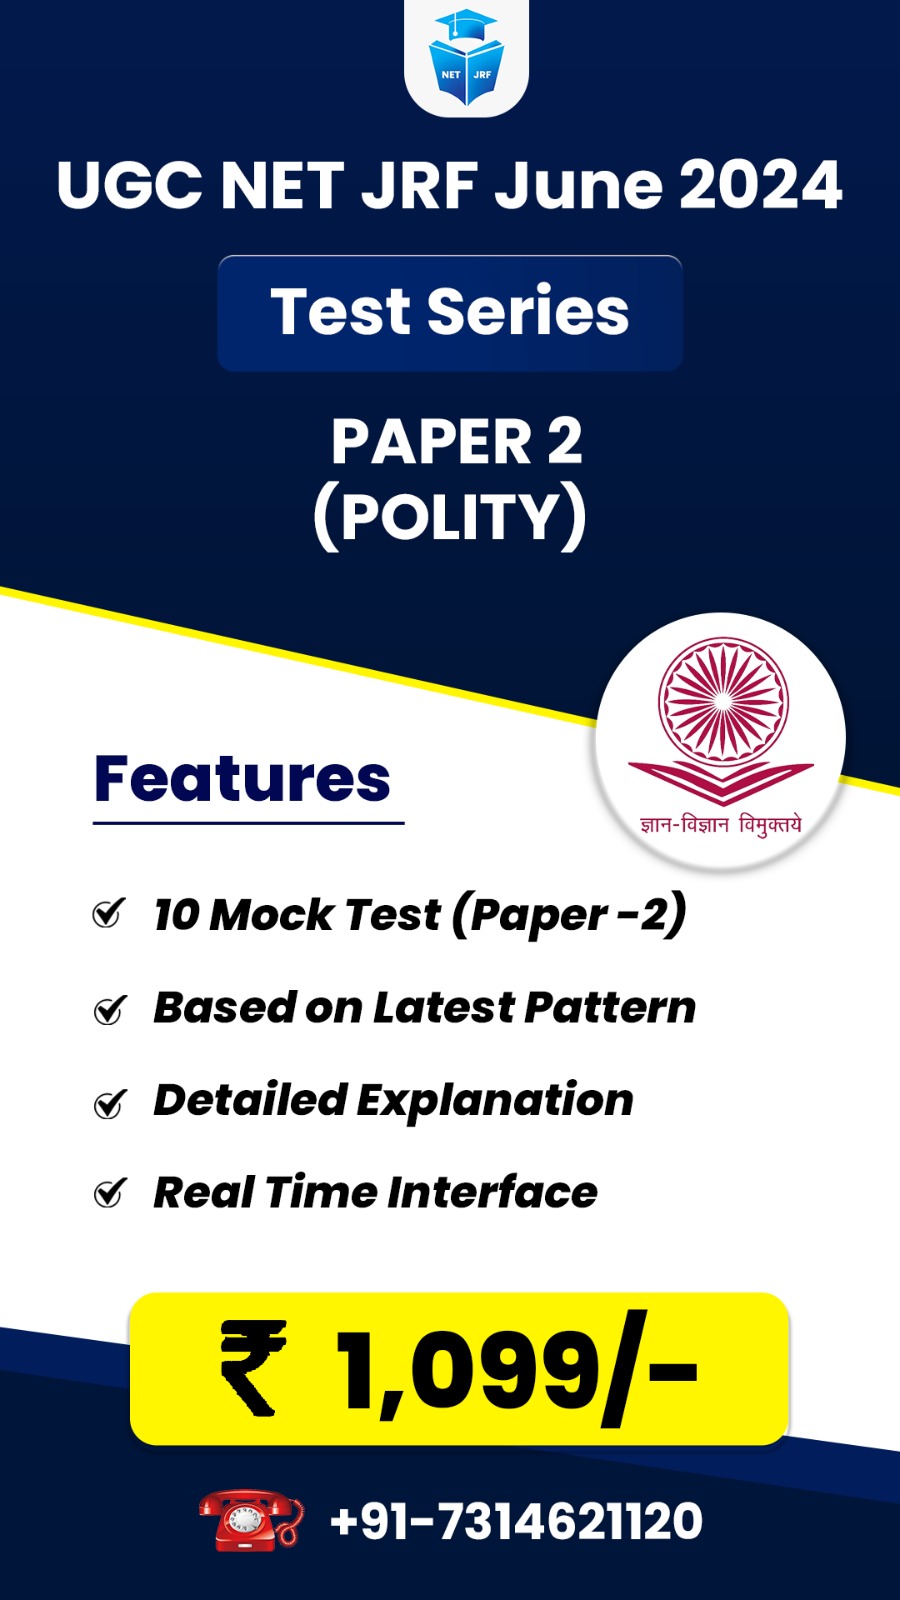 Polity (Paper 2) Test Series for June 2024